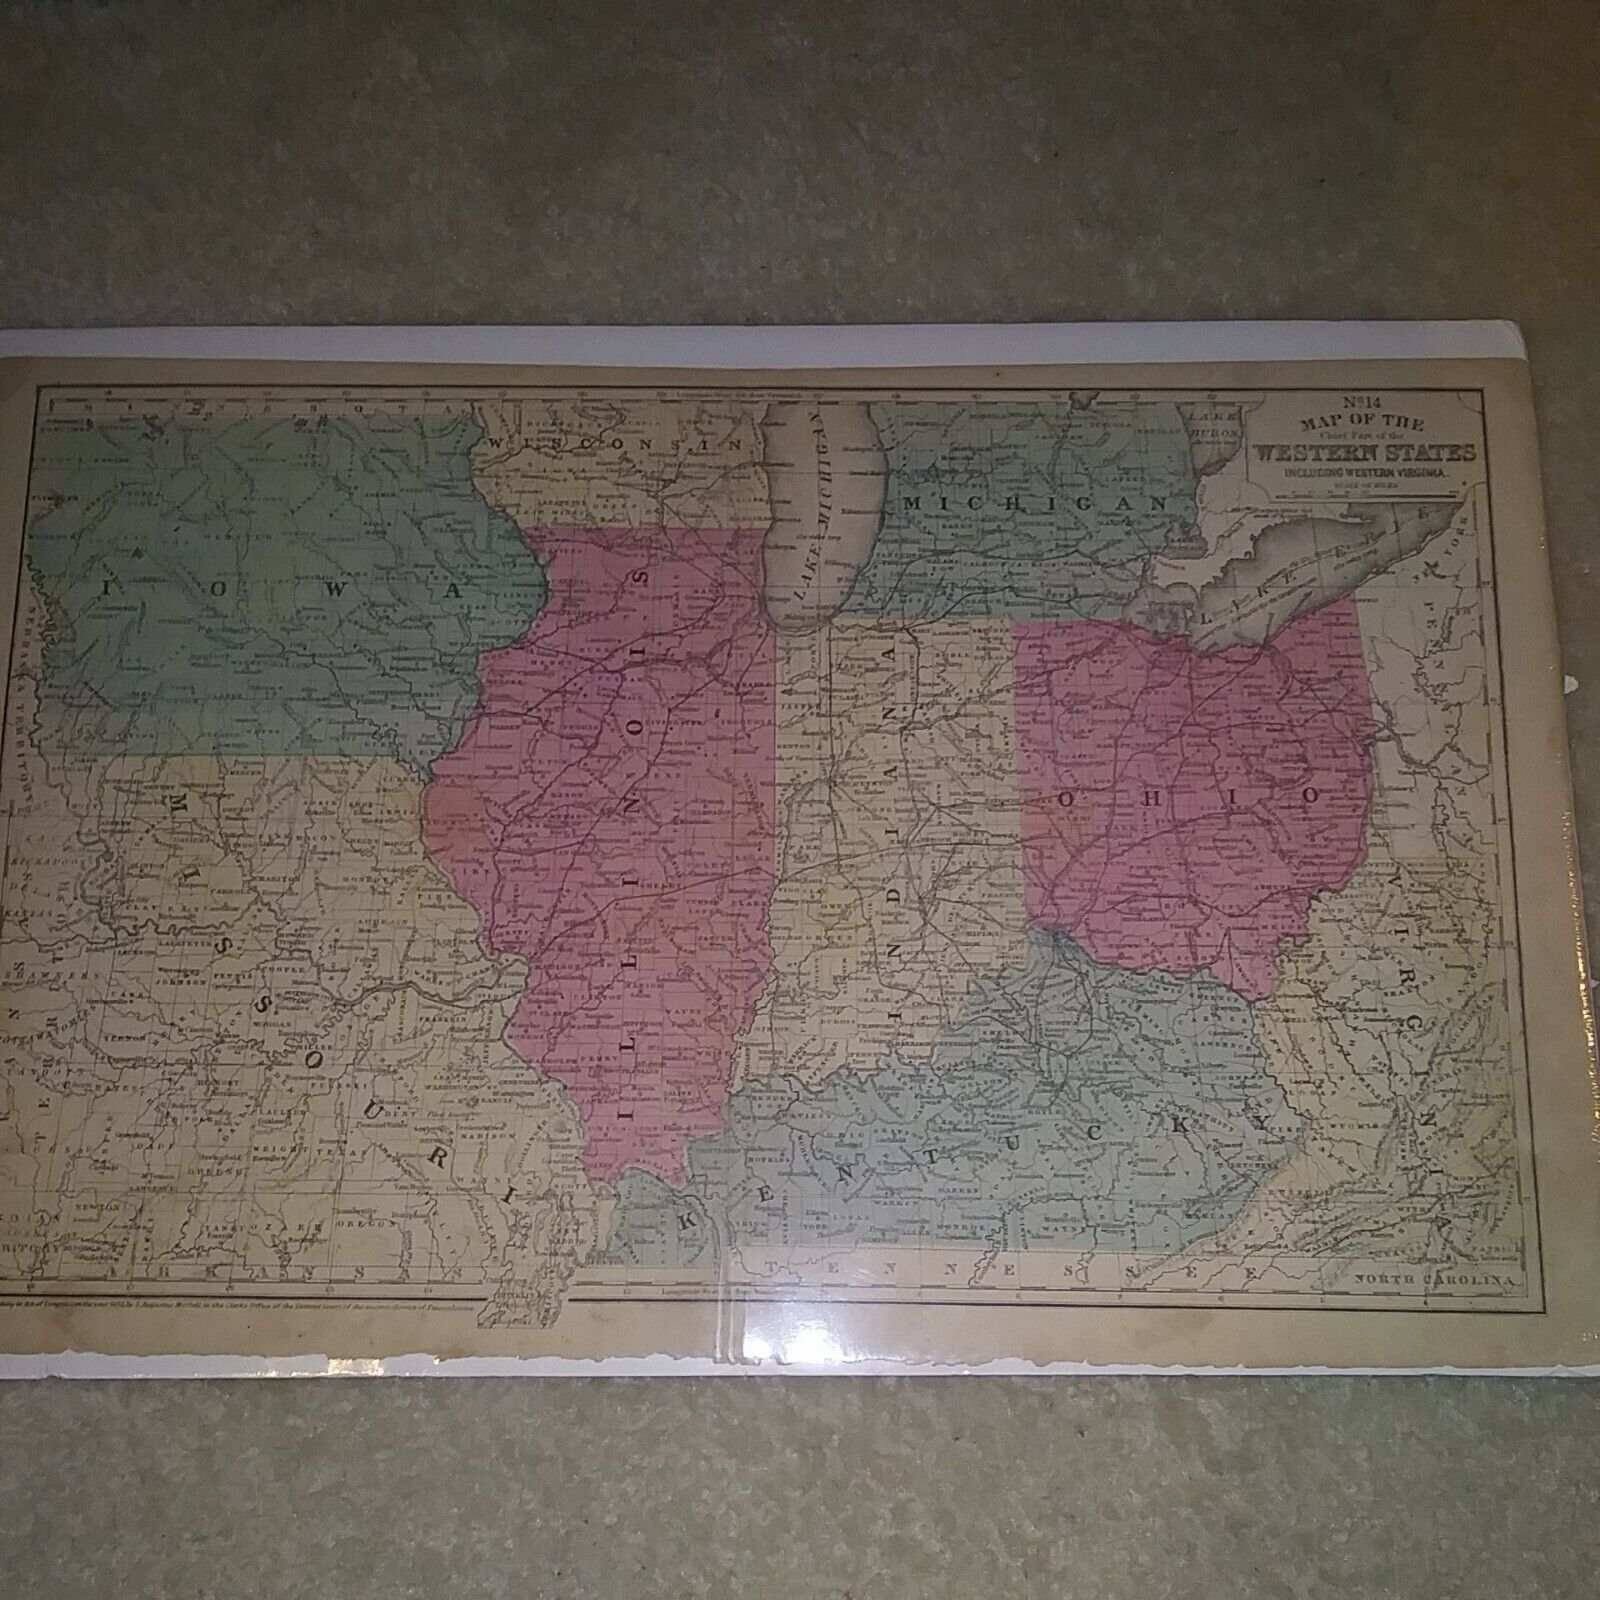 1852 Pre Civil War Engraved Western States Hand Colored Map IA,MO,IL,OH,KYMI,WI 